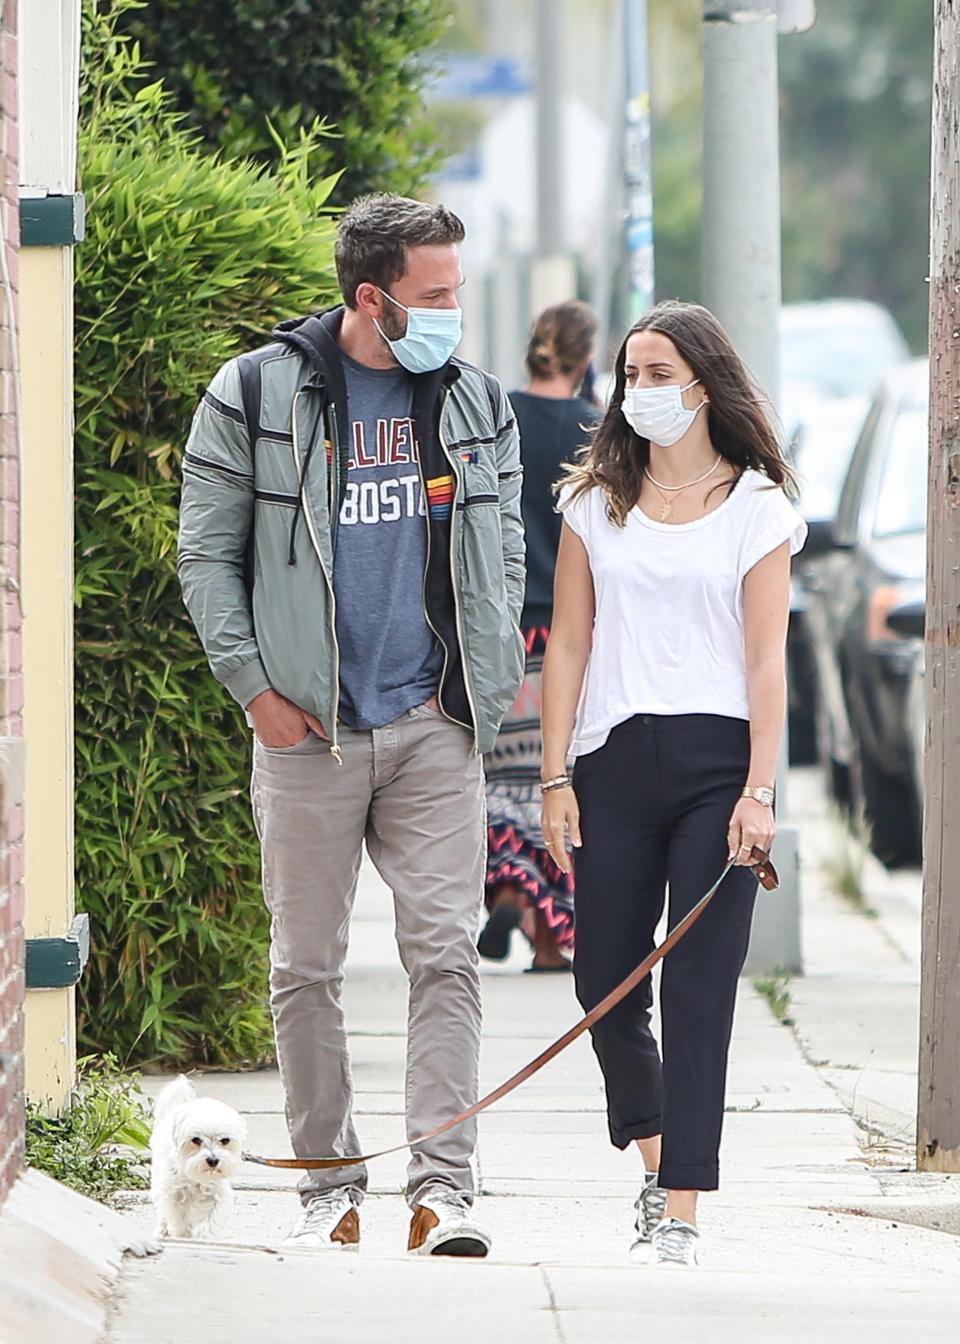 Ben Affleck and Ana de Armas are seen on July 24, 2020 in Los Angeles, California.